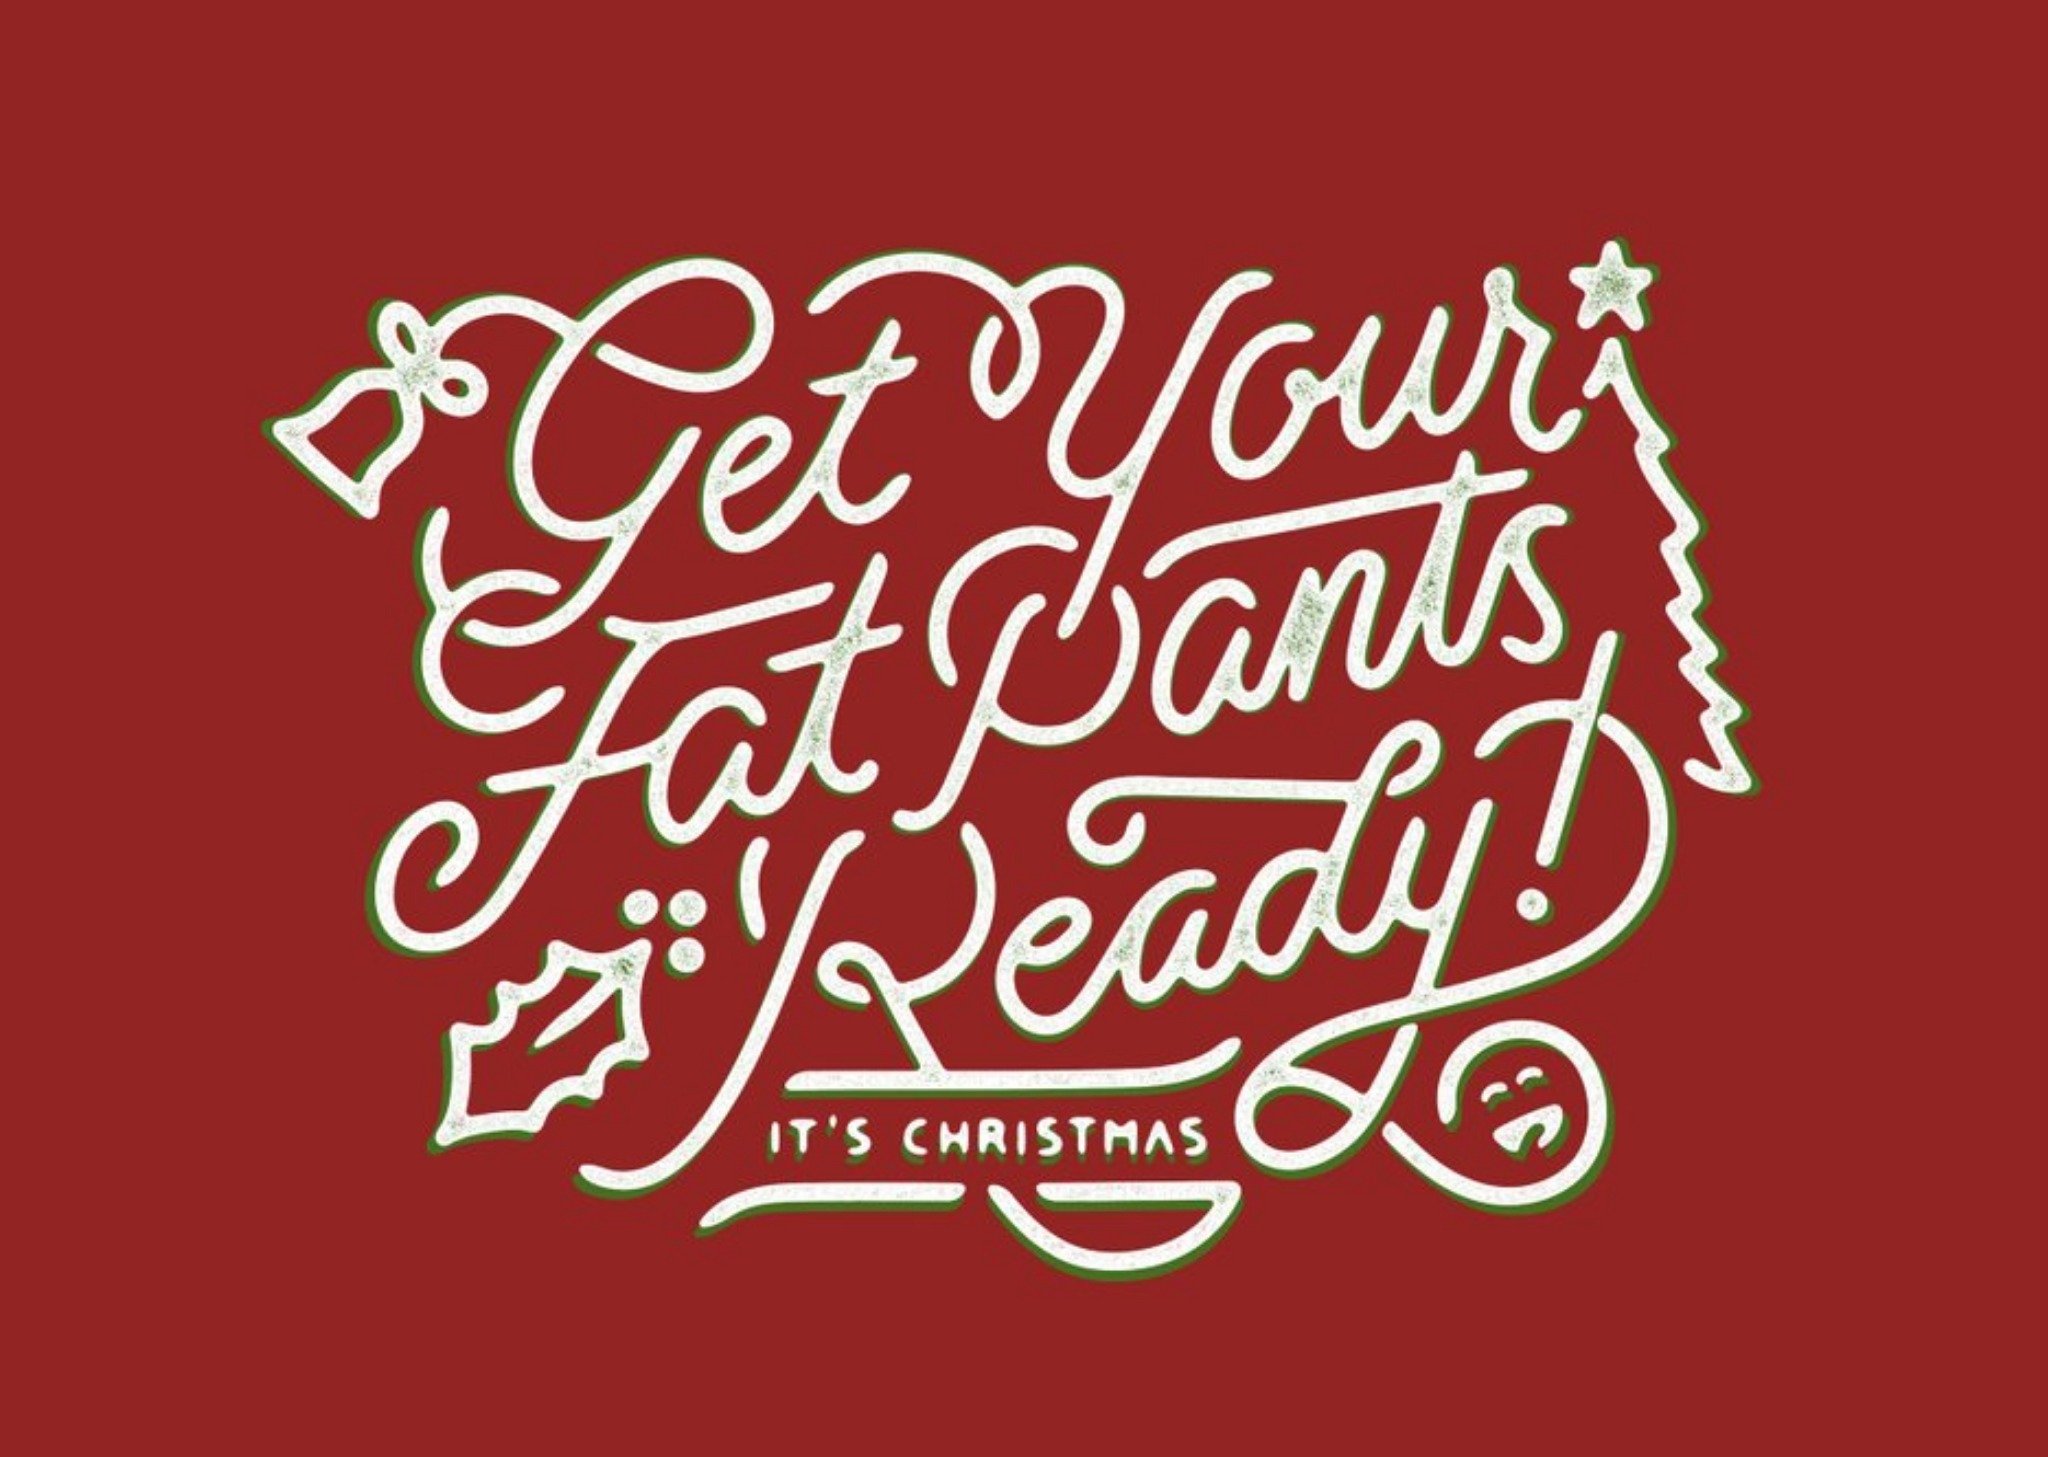 Moonpig Get Your Fat Pants Ready Christmas Card, Large